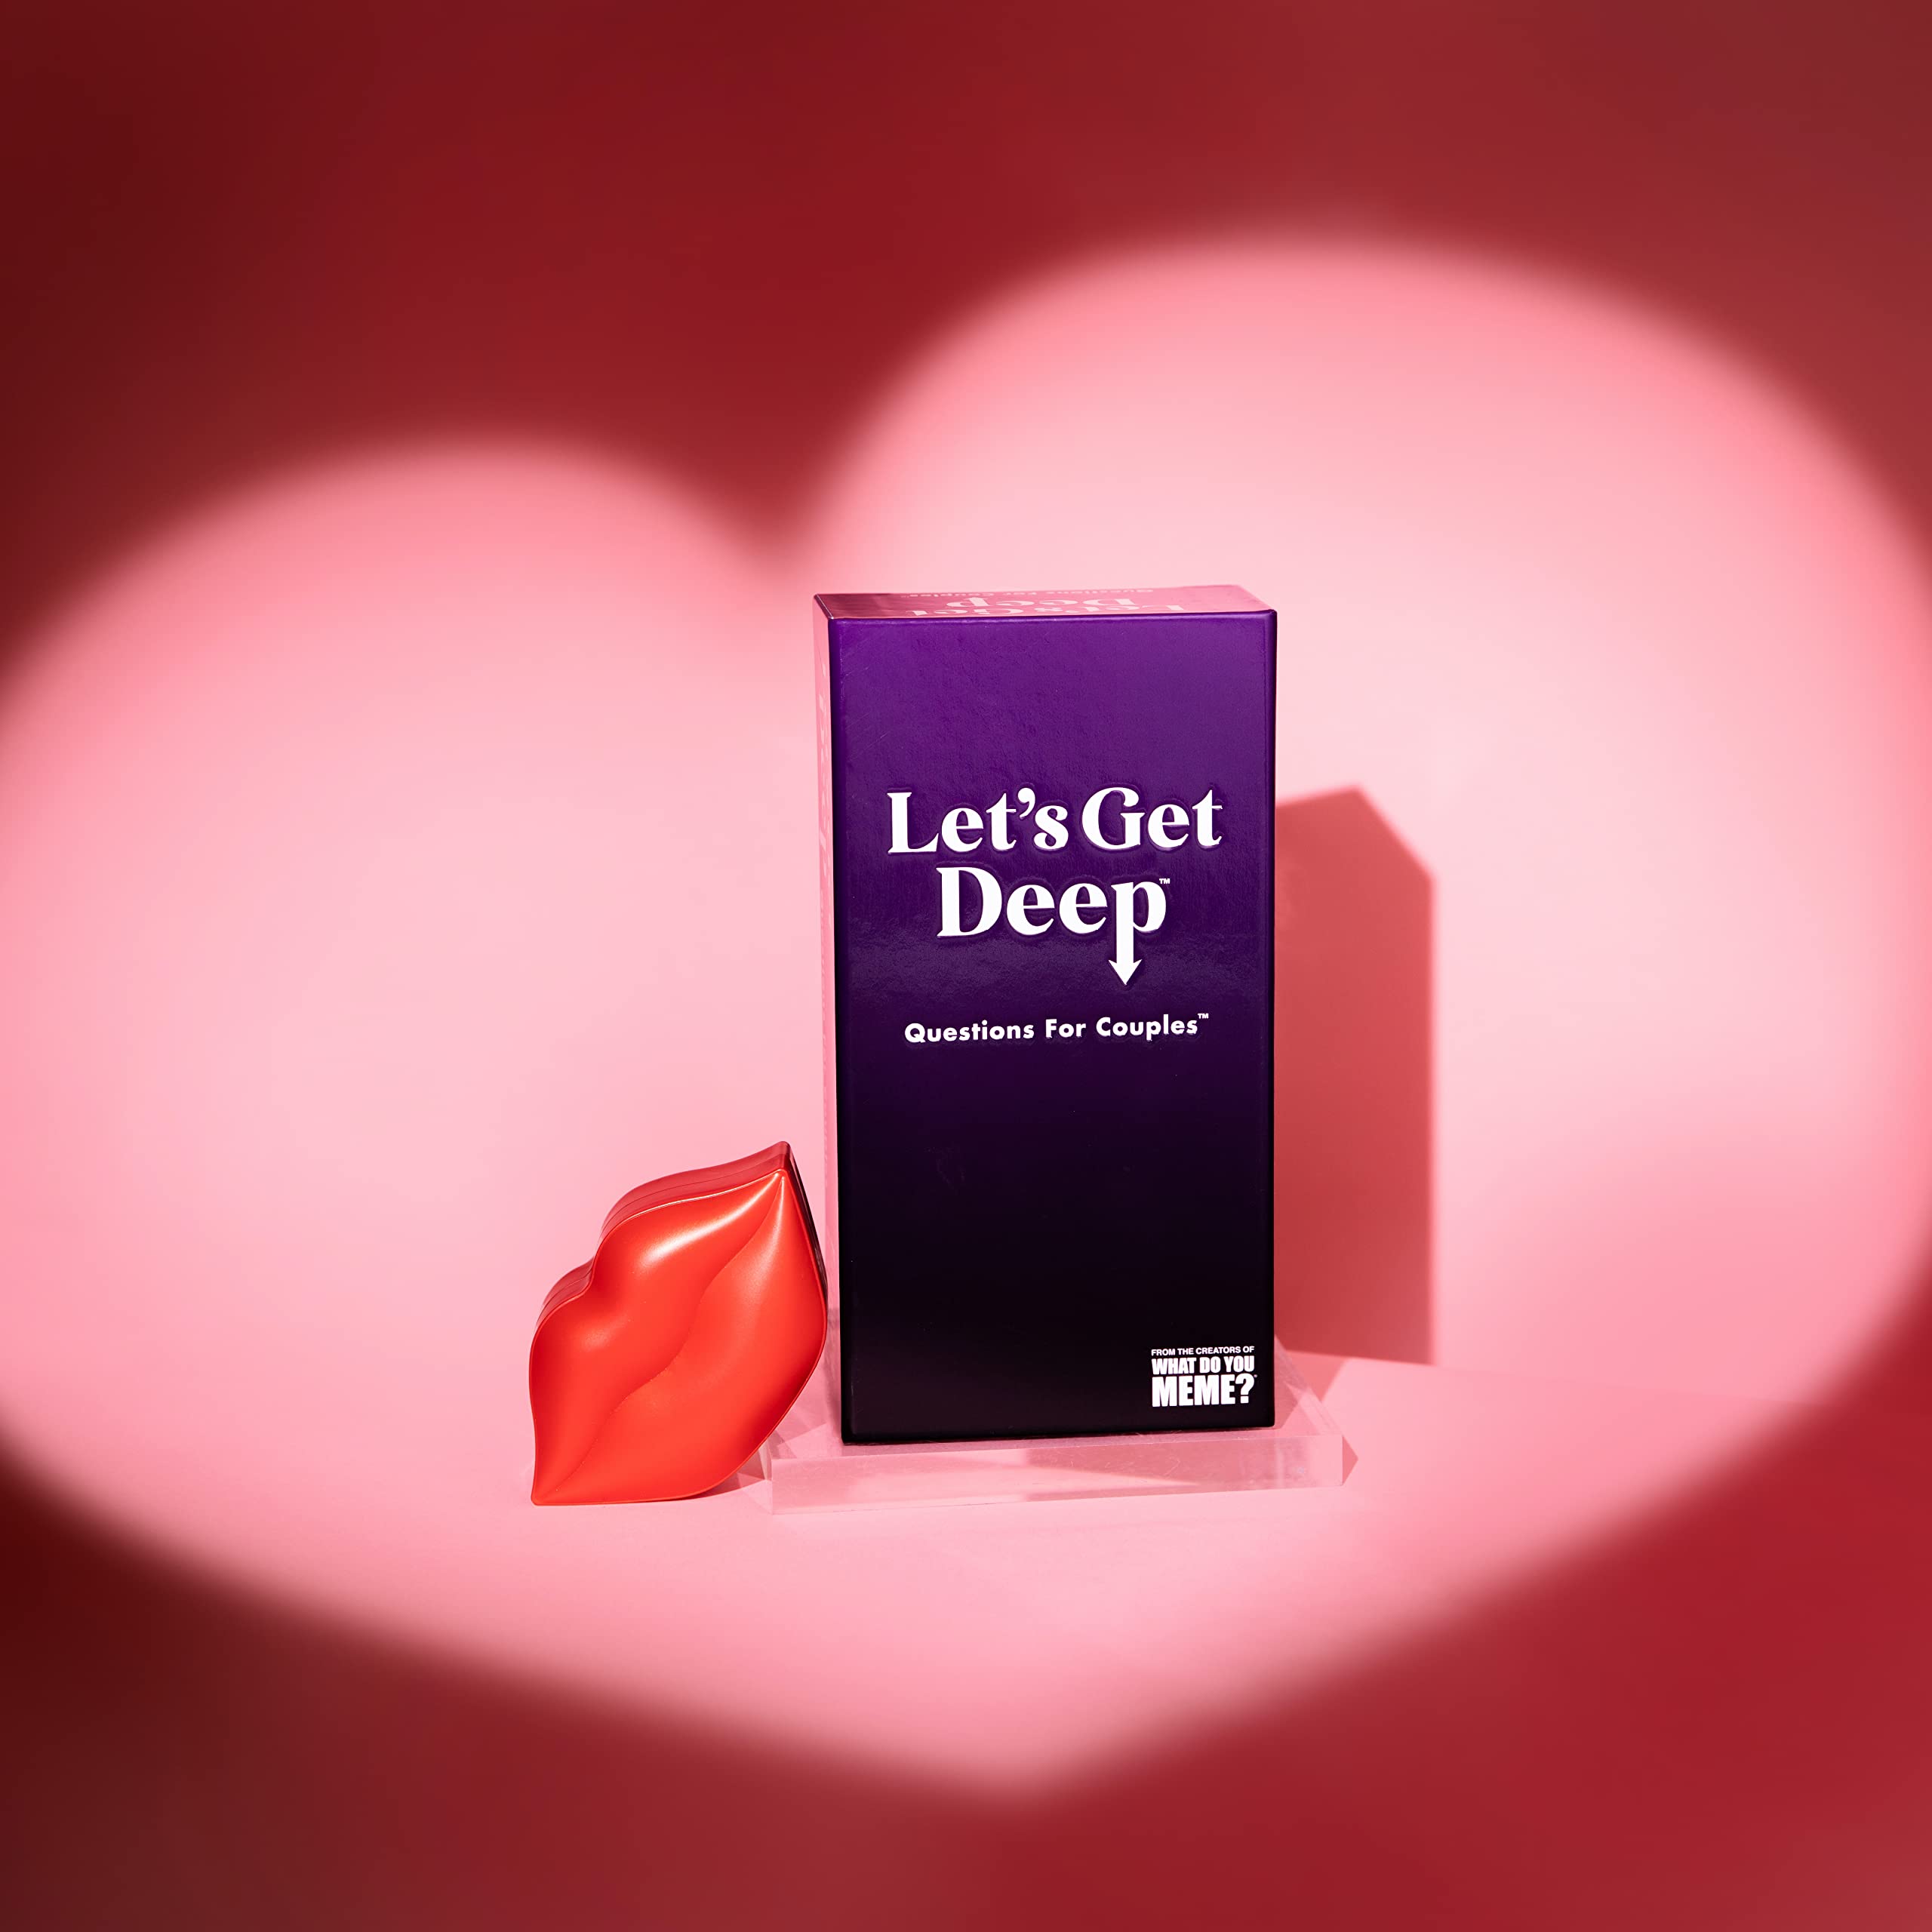 Let's Get Deep - Conversation Cards for Couples - Love Language Card Game by What Do You Meme?